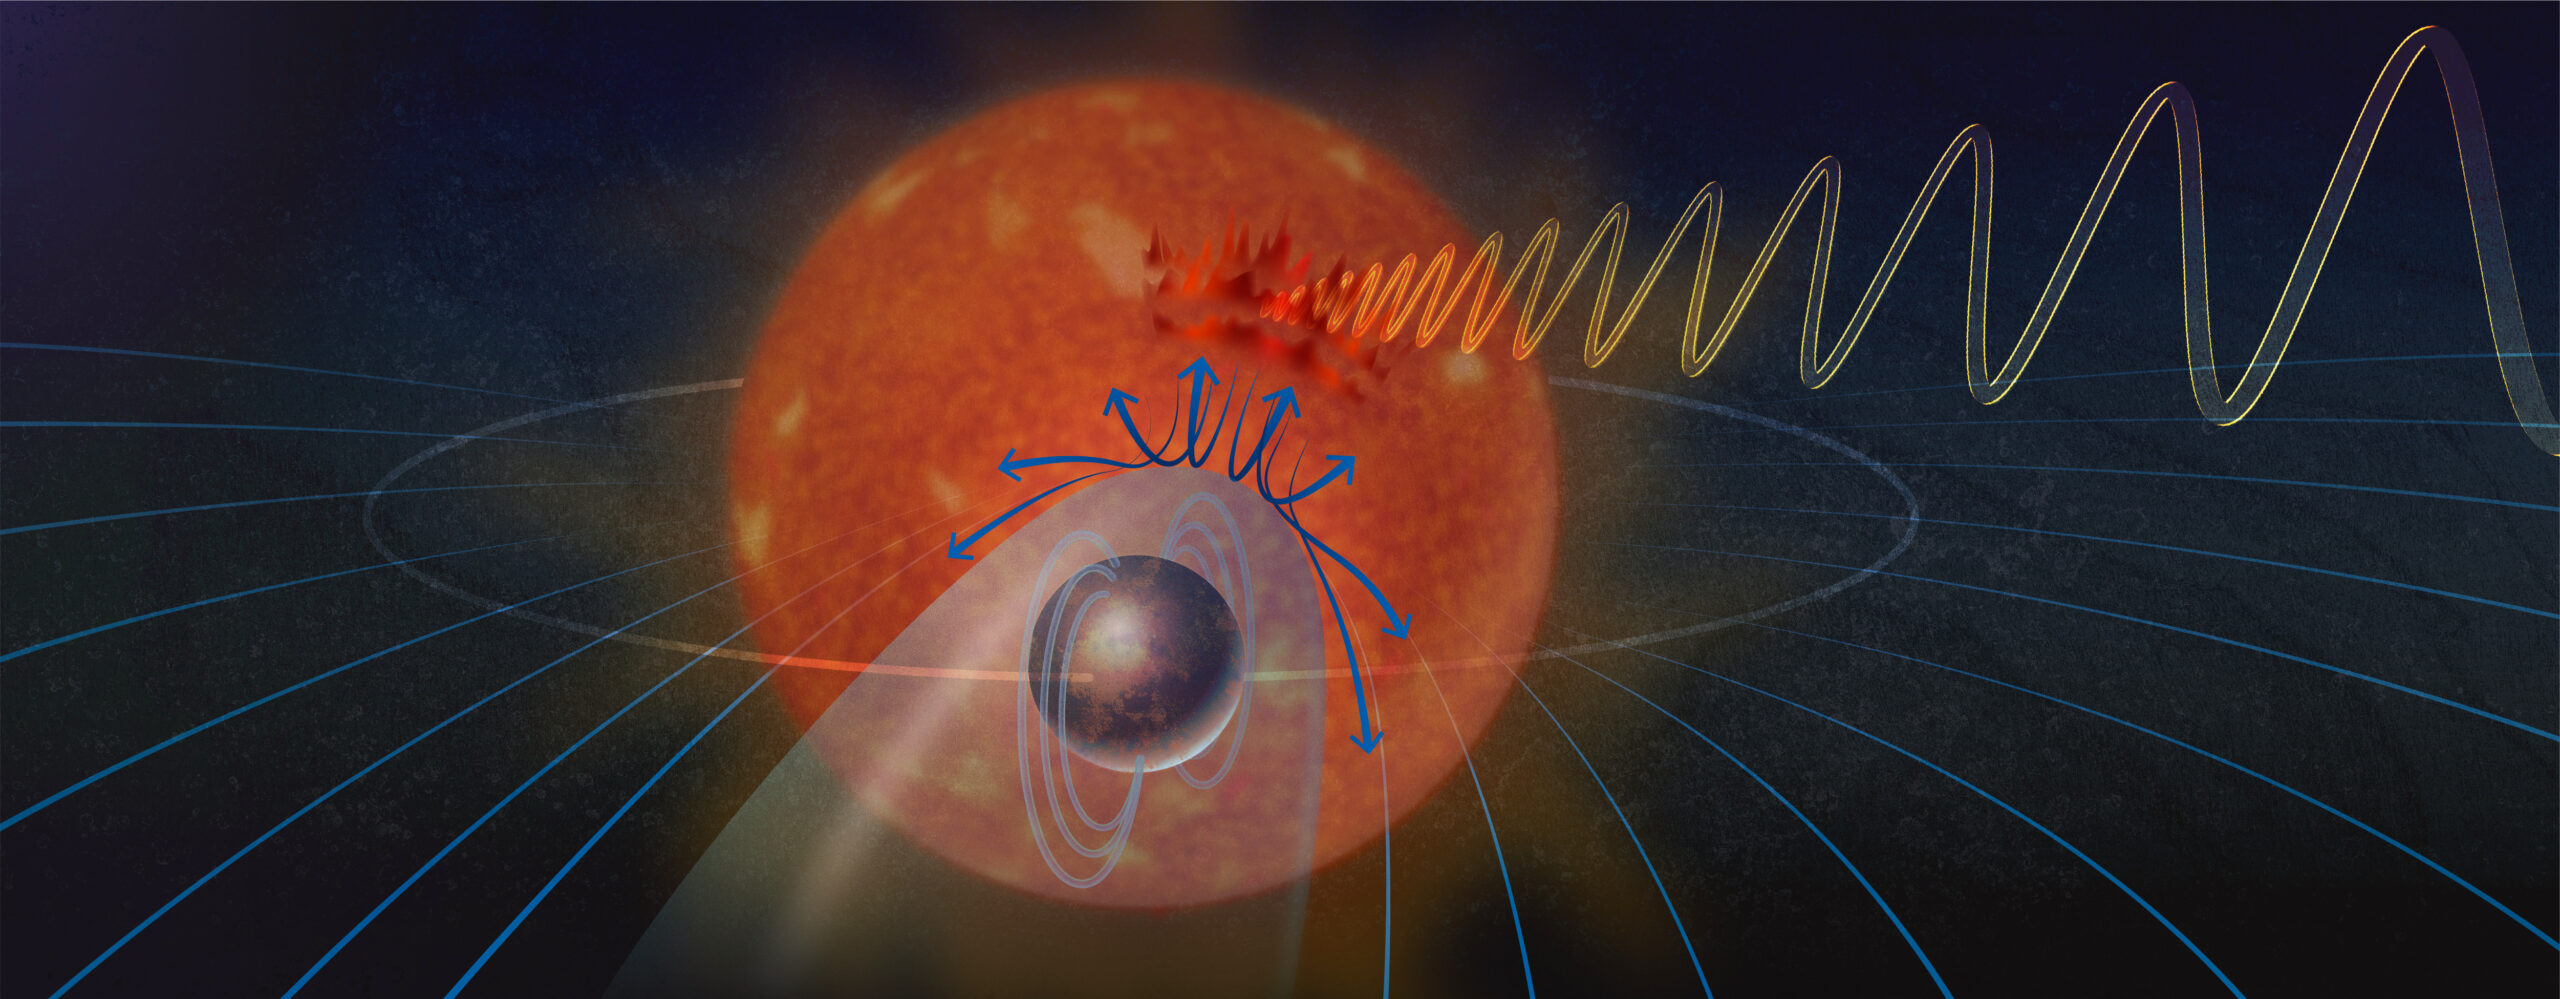 An artist's conceptual rendering of interactions between an exoplanet and its star. Plasma emitted from the star is deflected by the exoplanet's magnetic field. That interaction perturbs the star’s magnetic field and generates auroras on the star and radio waves. Credit Alice Kitterman/National Science Foundation